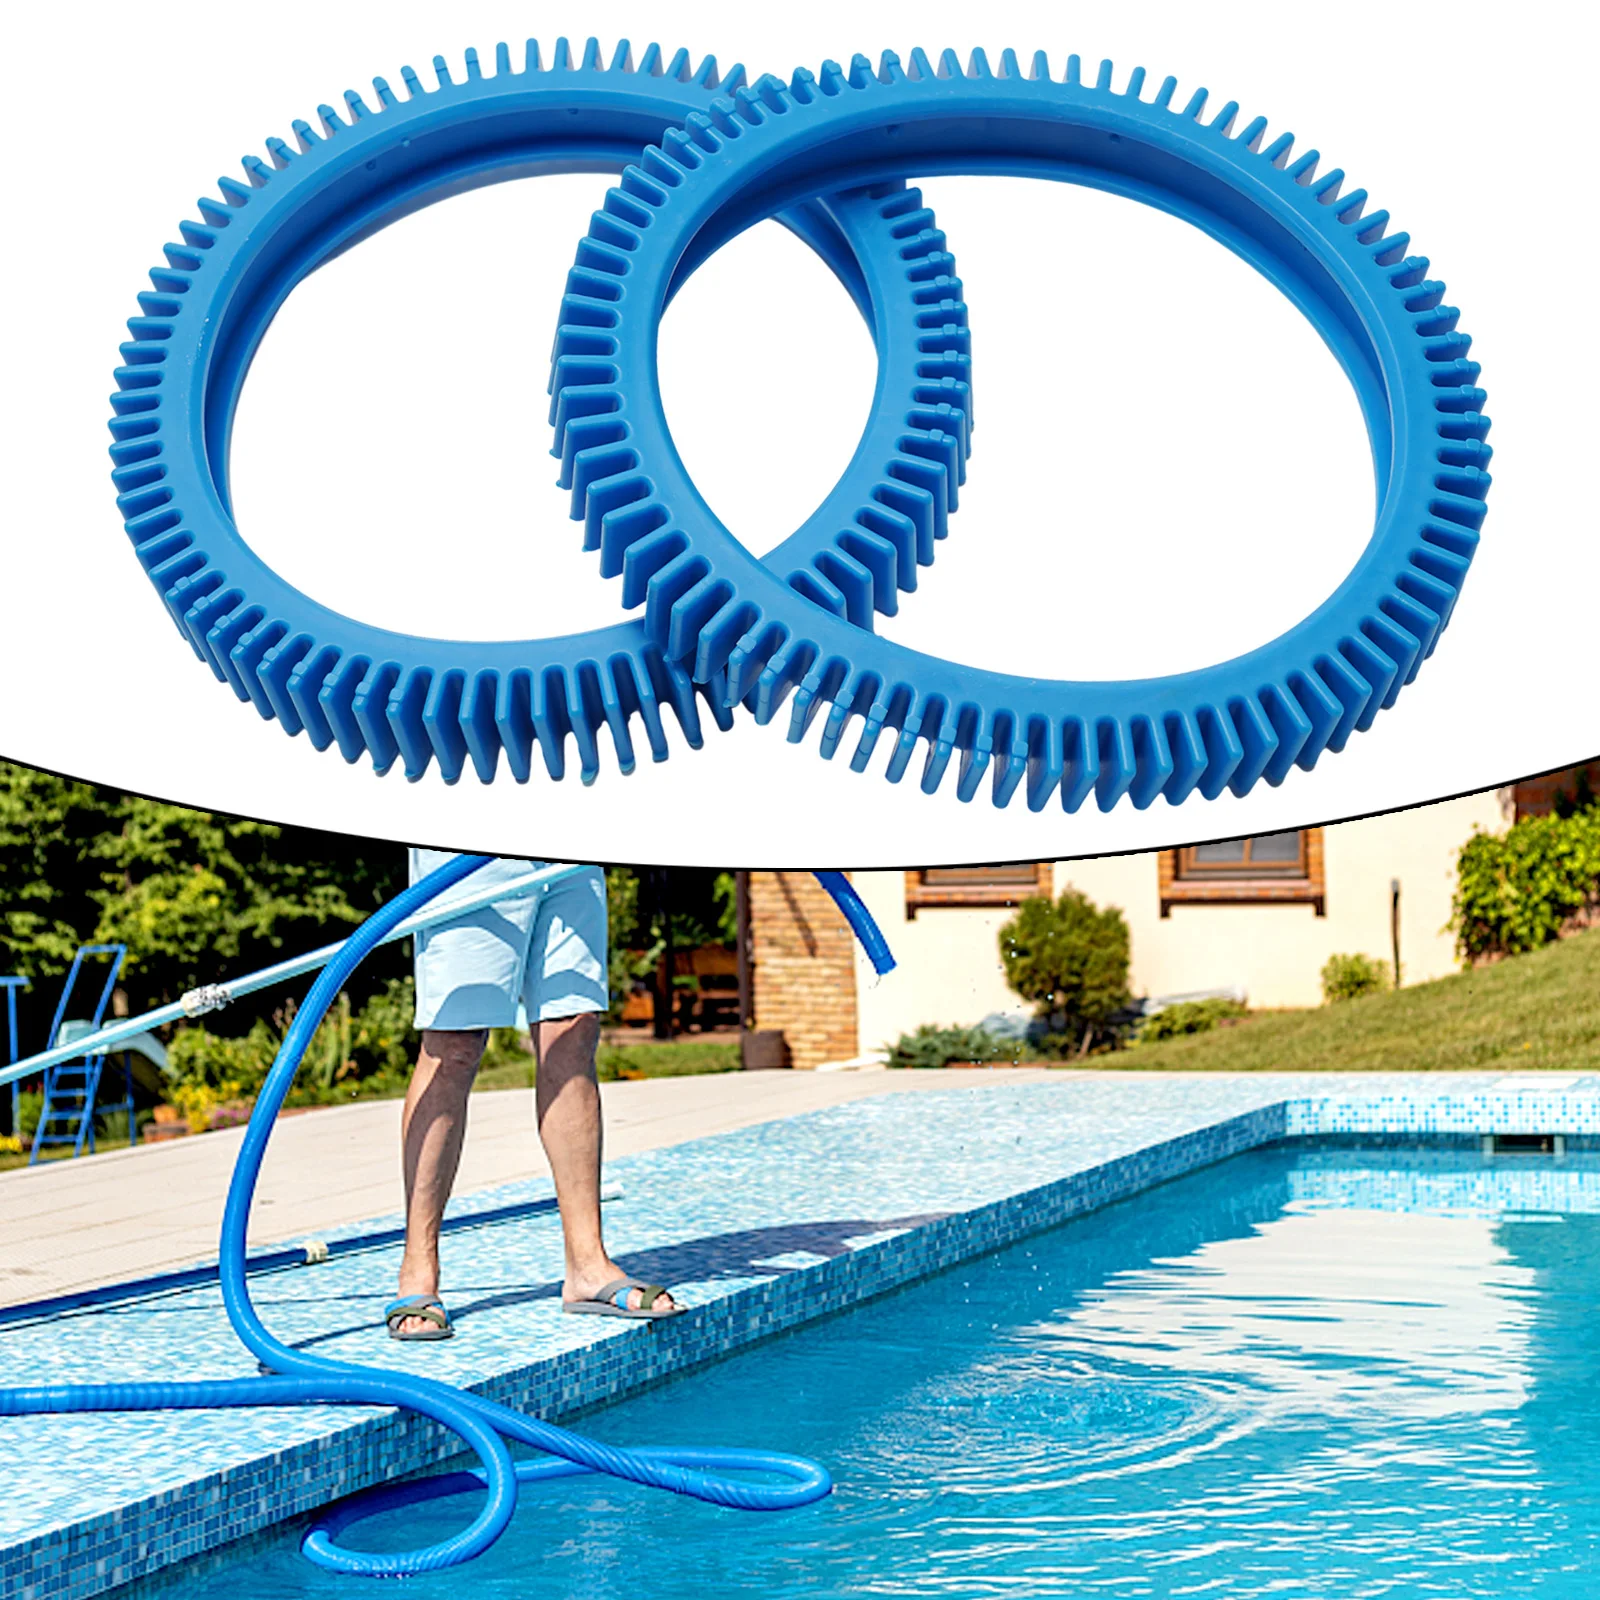 

2pcs Back Tire Kit For Hayward Pool Vacuum Cleaner 4 Wheel Aquanaut 400 450 896584000-082 Outdoor Hot Tubs Accessories Replace